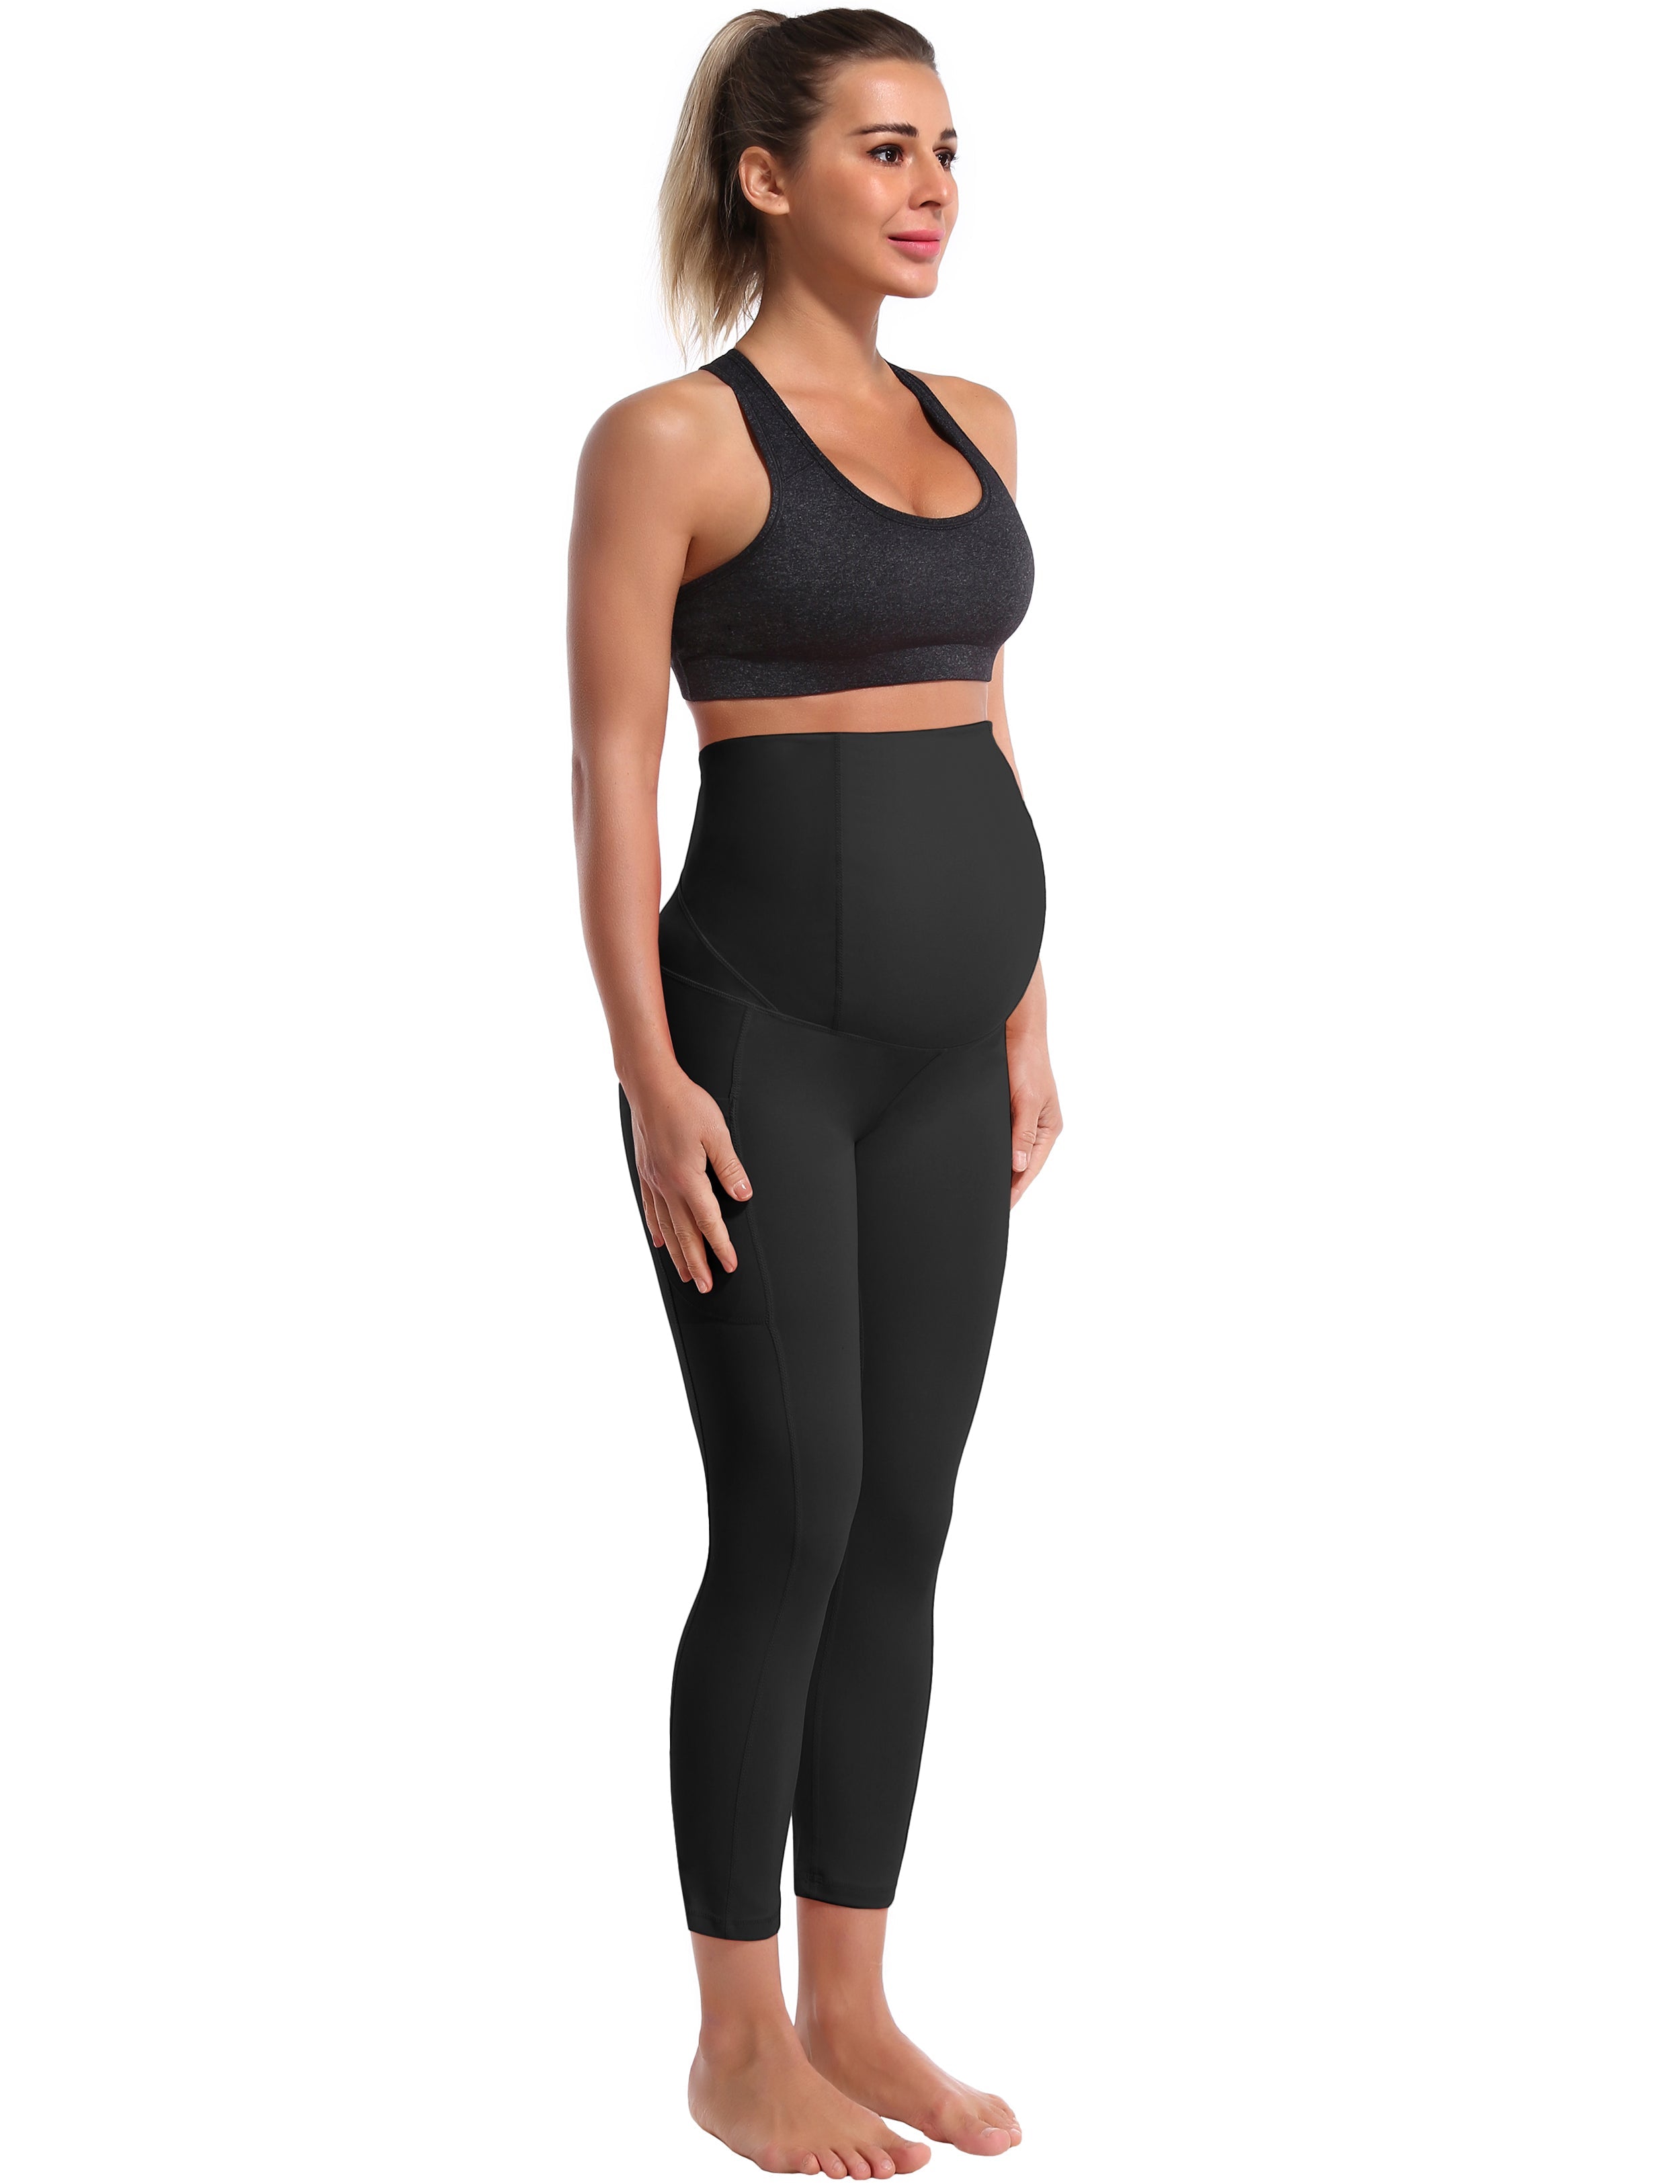 22" Side Pockets Maternity Gym Pants black 87%Nylon/13%Spandex Softest-ever fabric High elasticity 4-way stretch Fabric doesn't attract lint easily No see-through Moisture-wicking Machine wash